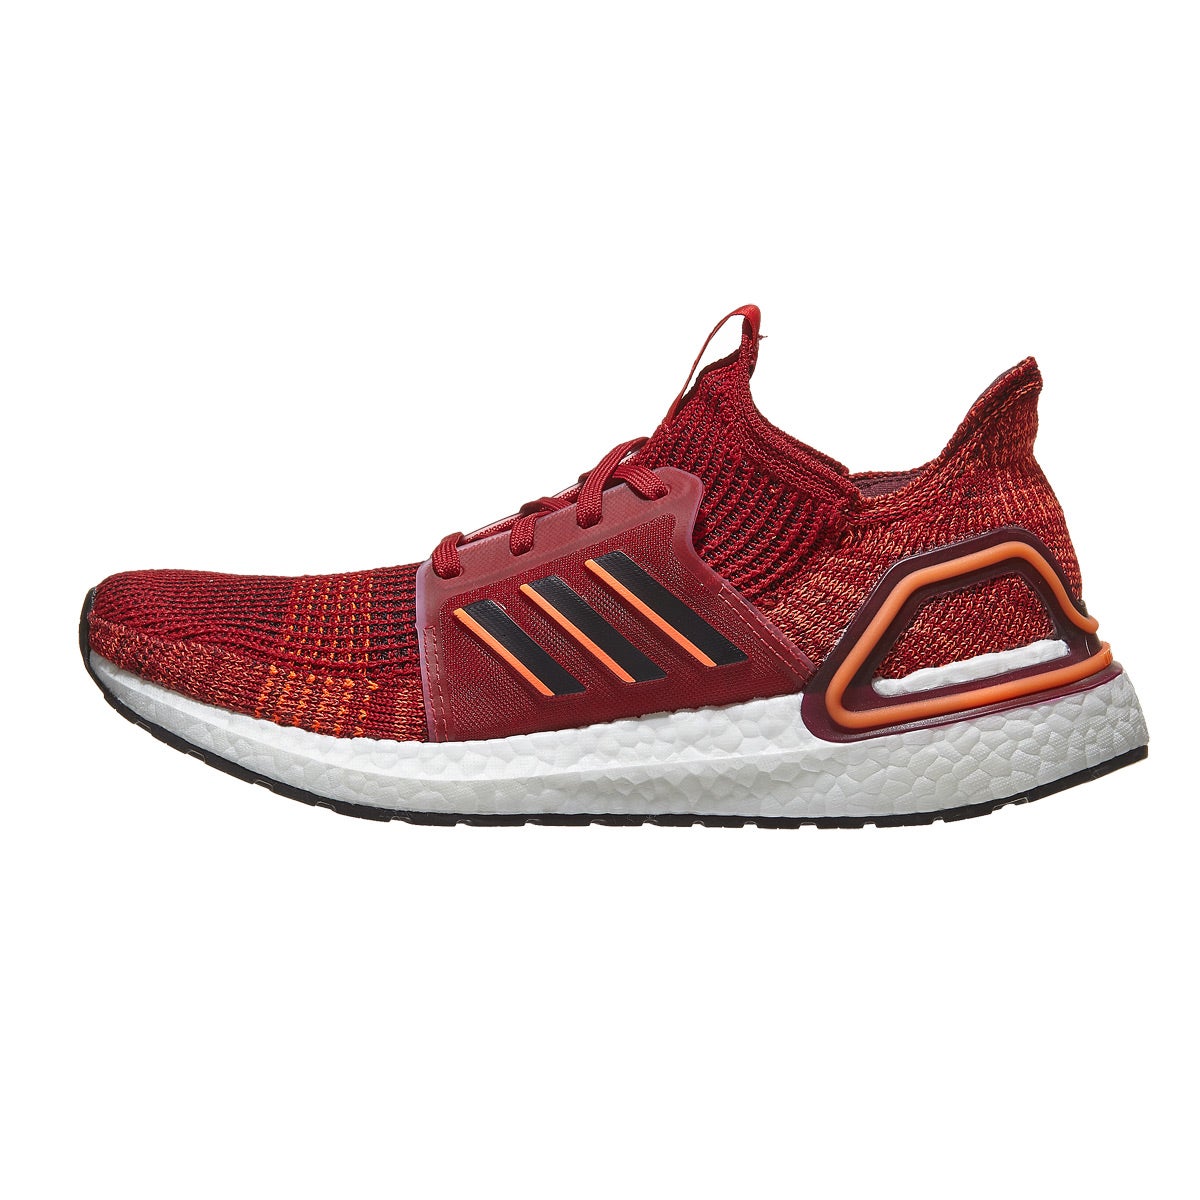 adidas Ultra Boost 19 Men's Shoes Active Maroon/Blac 360° View ...